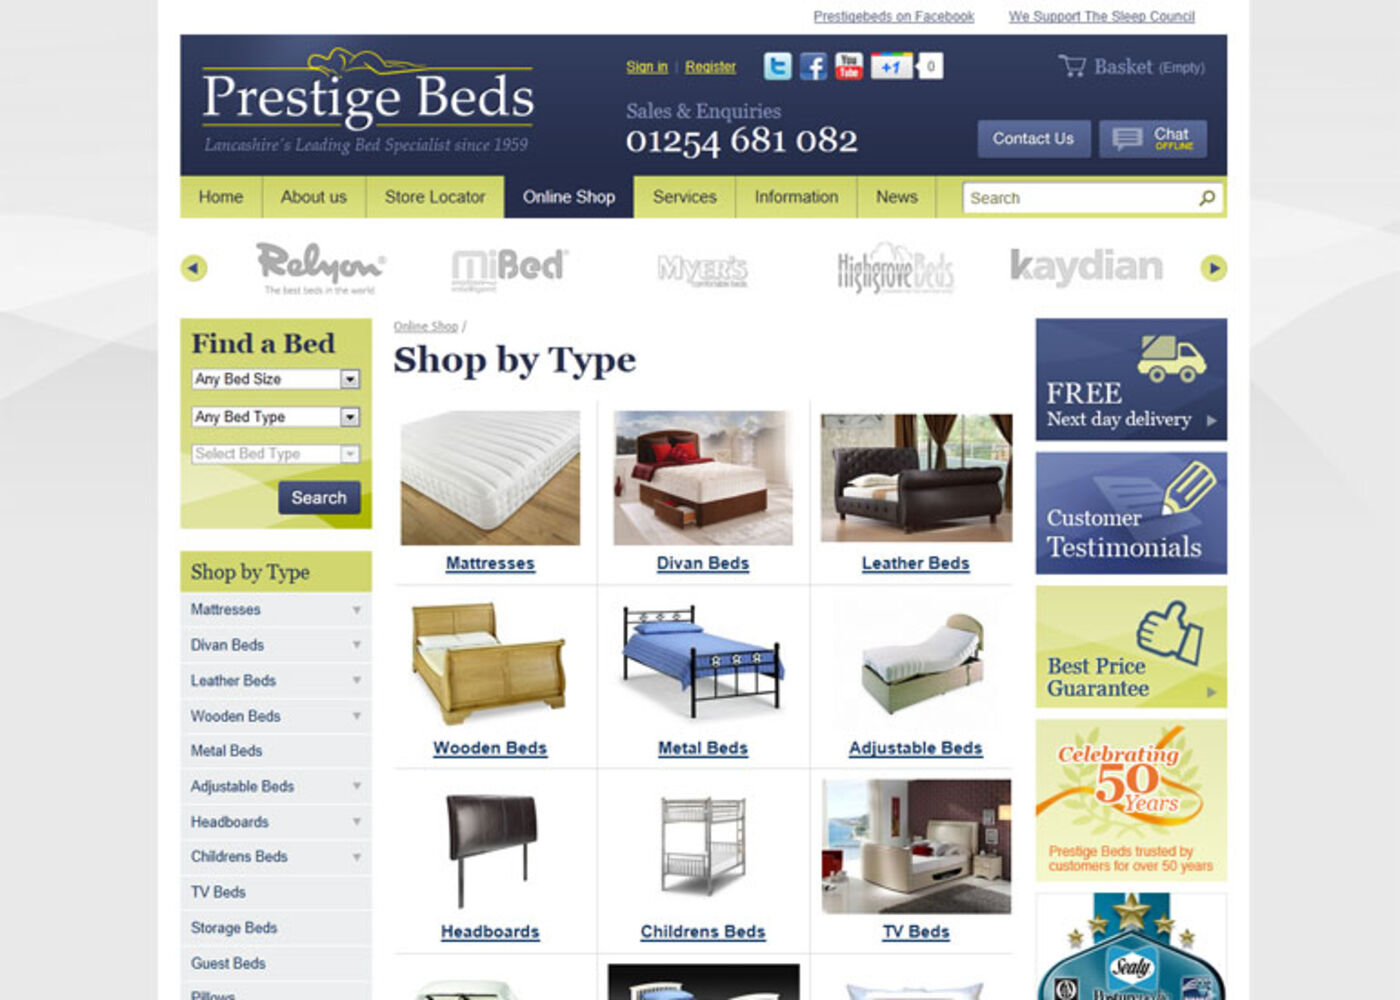 Prestige Beds (2011) Shope by Type